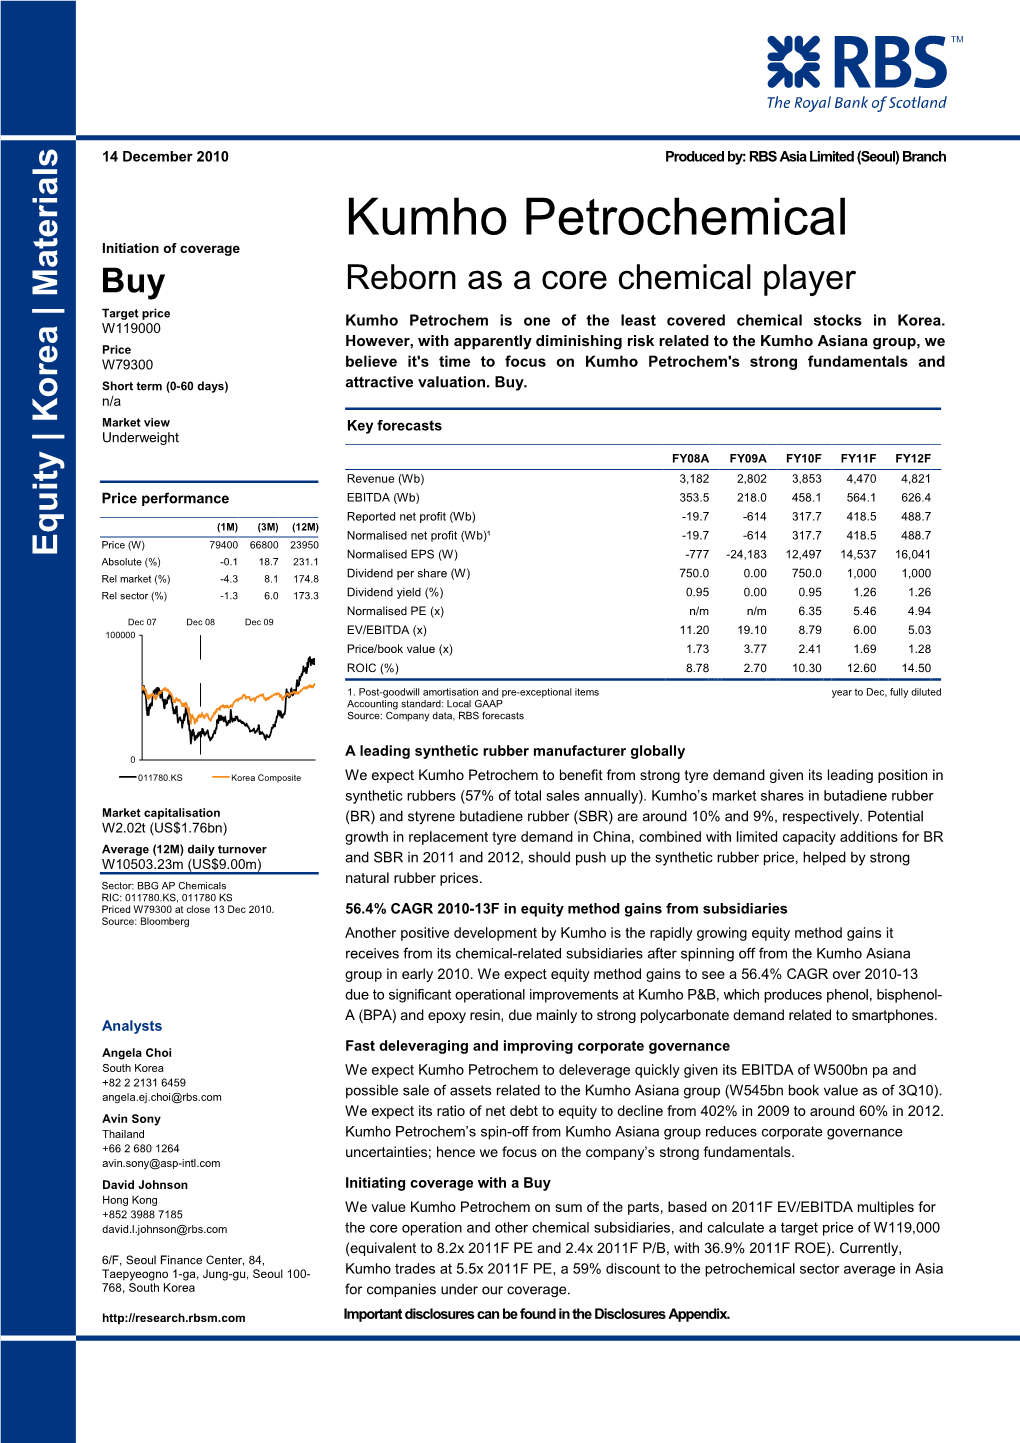 Kumho Petrochemical Initiation of Coverage